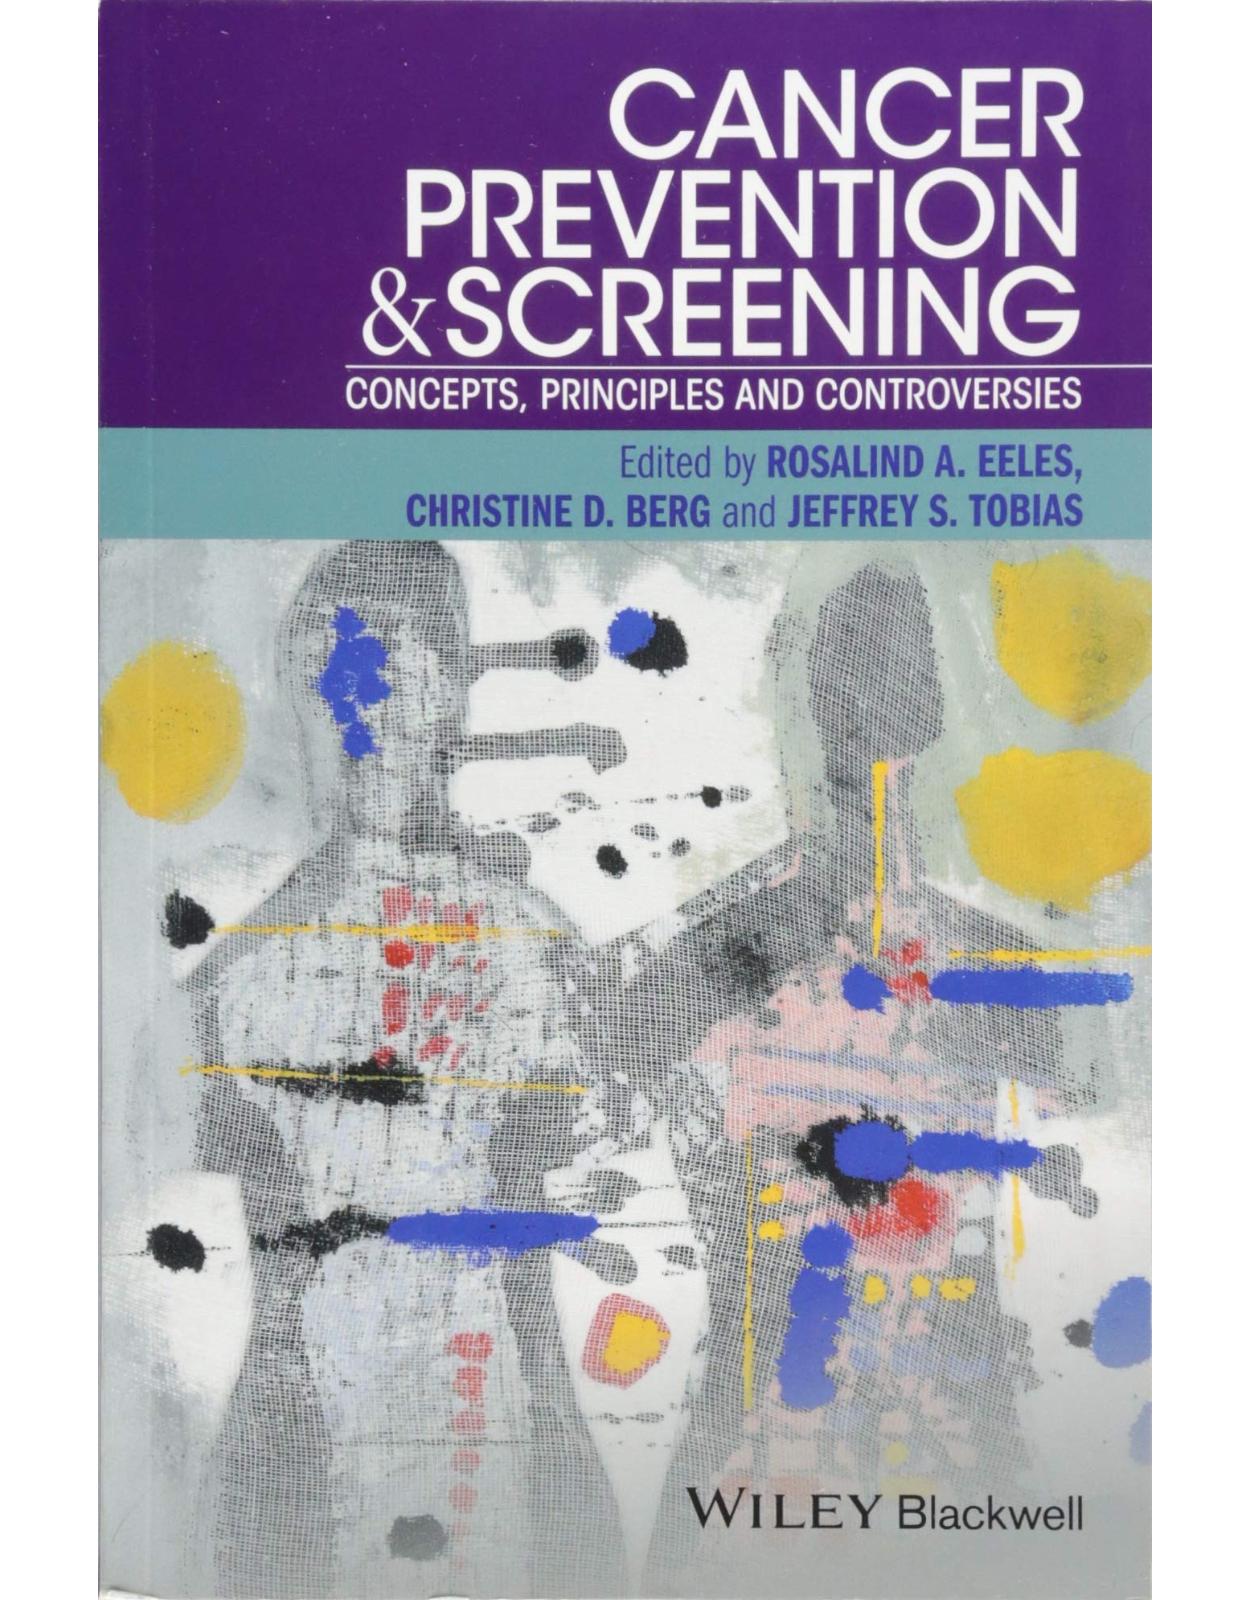 Cancer Prevention and Screening: Concepts, Principles and Controversies